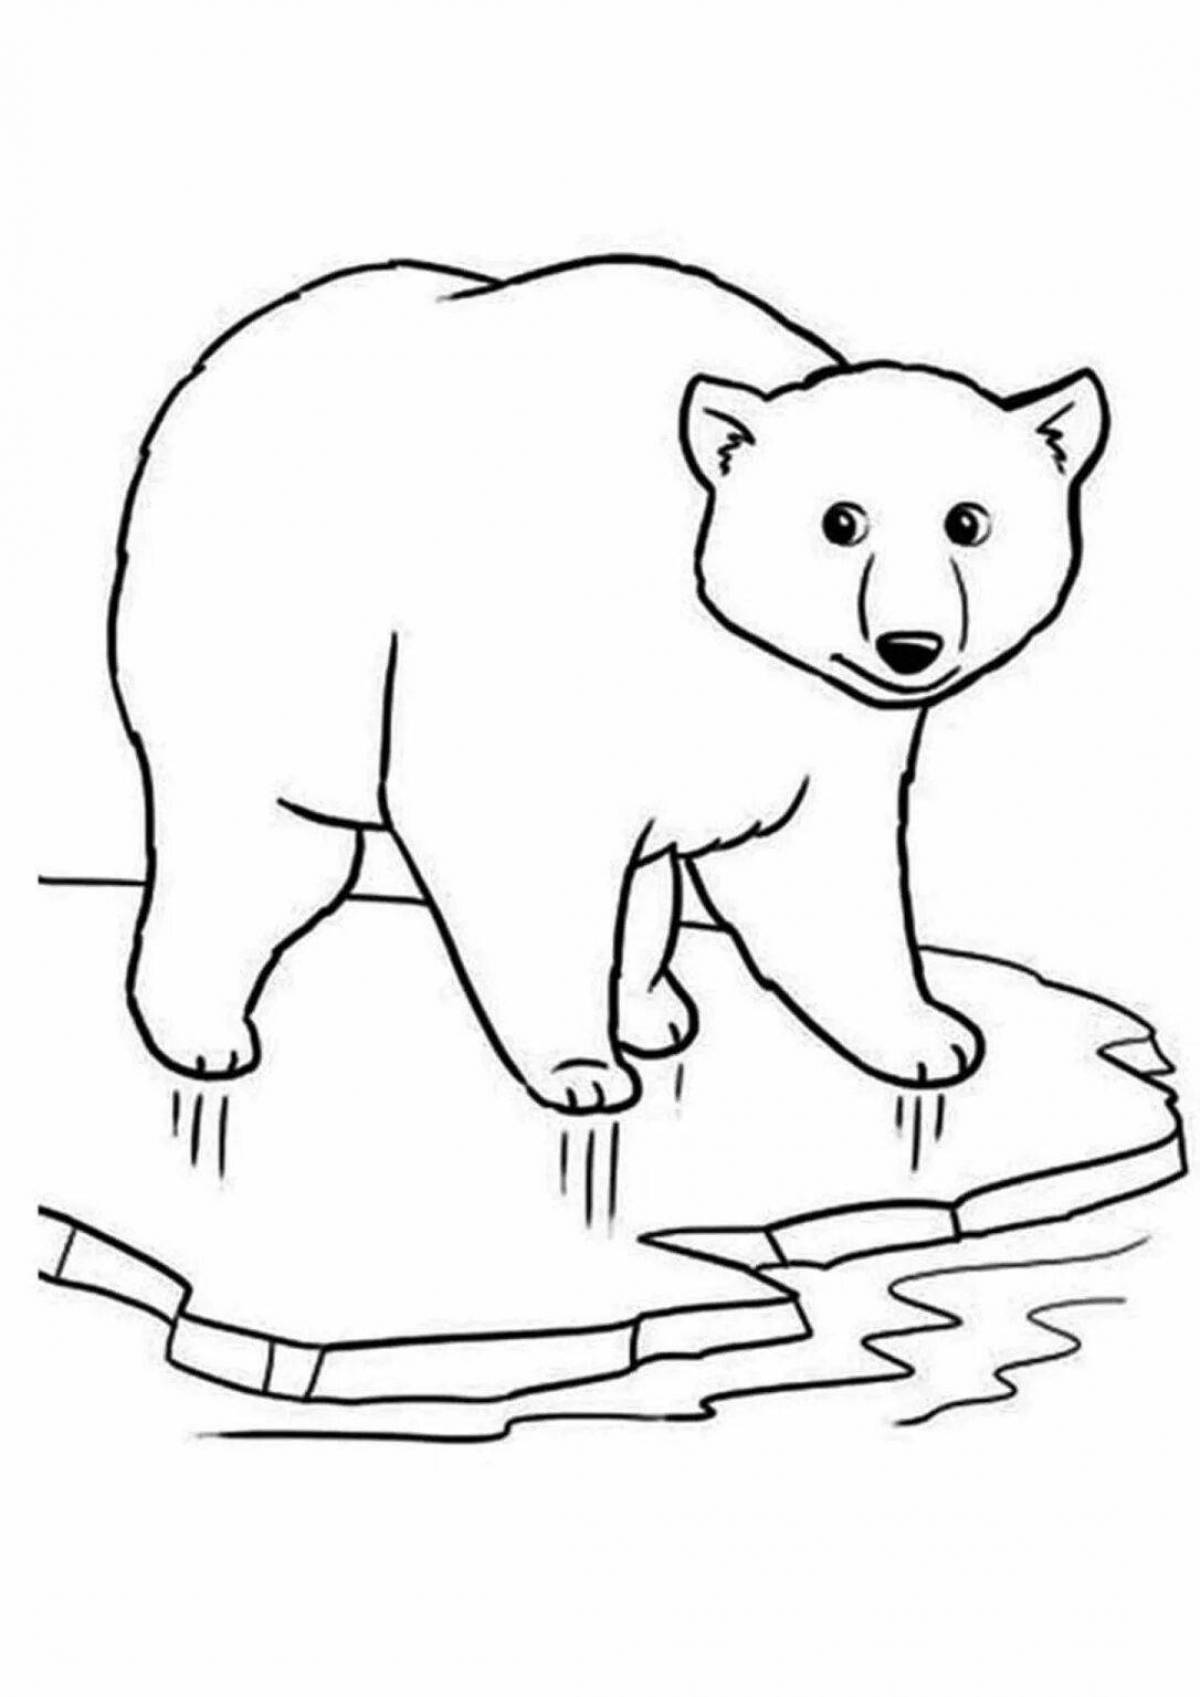 Majestic walrus flock coloring page